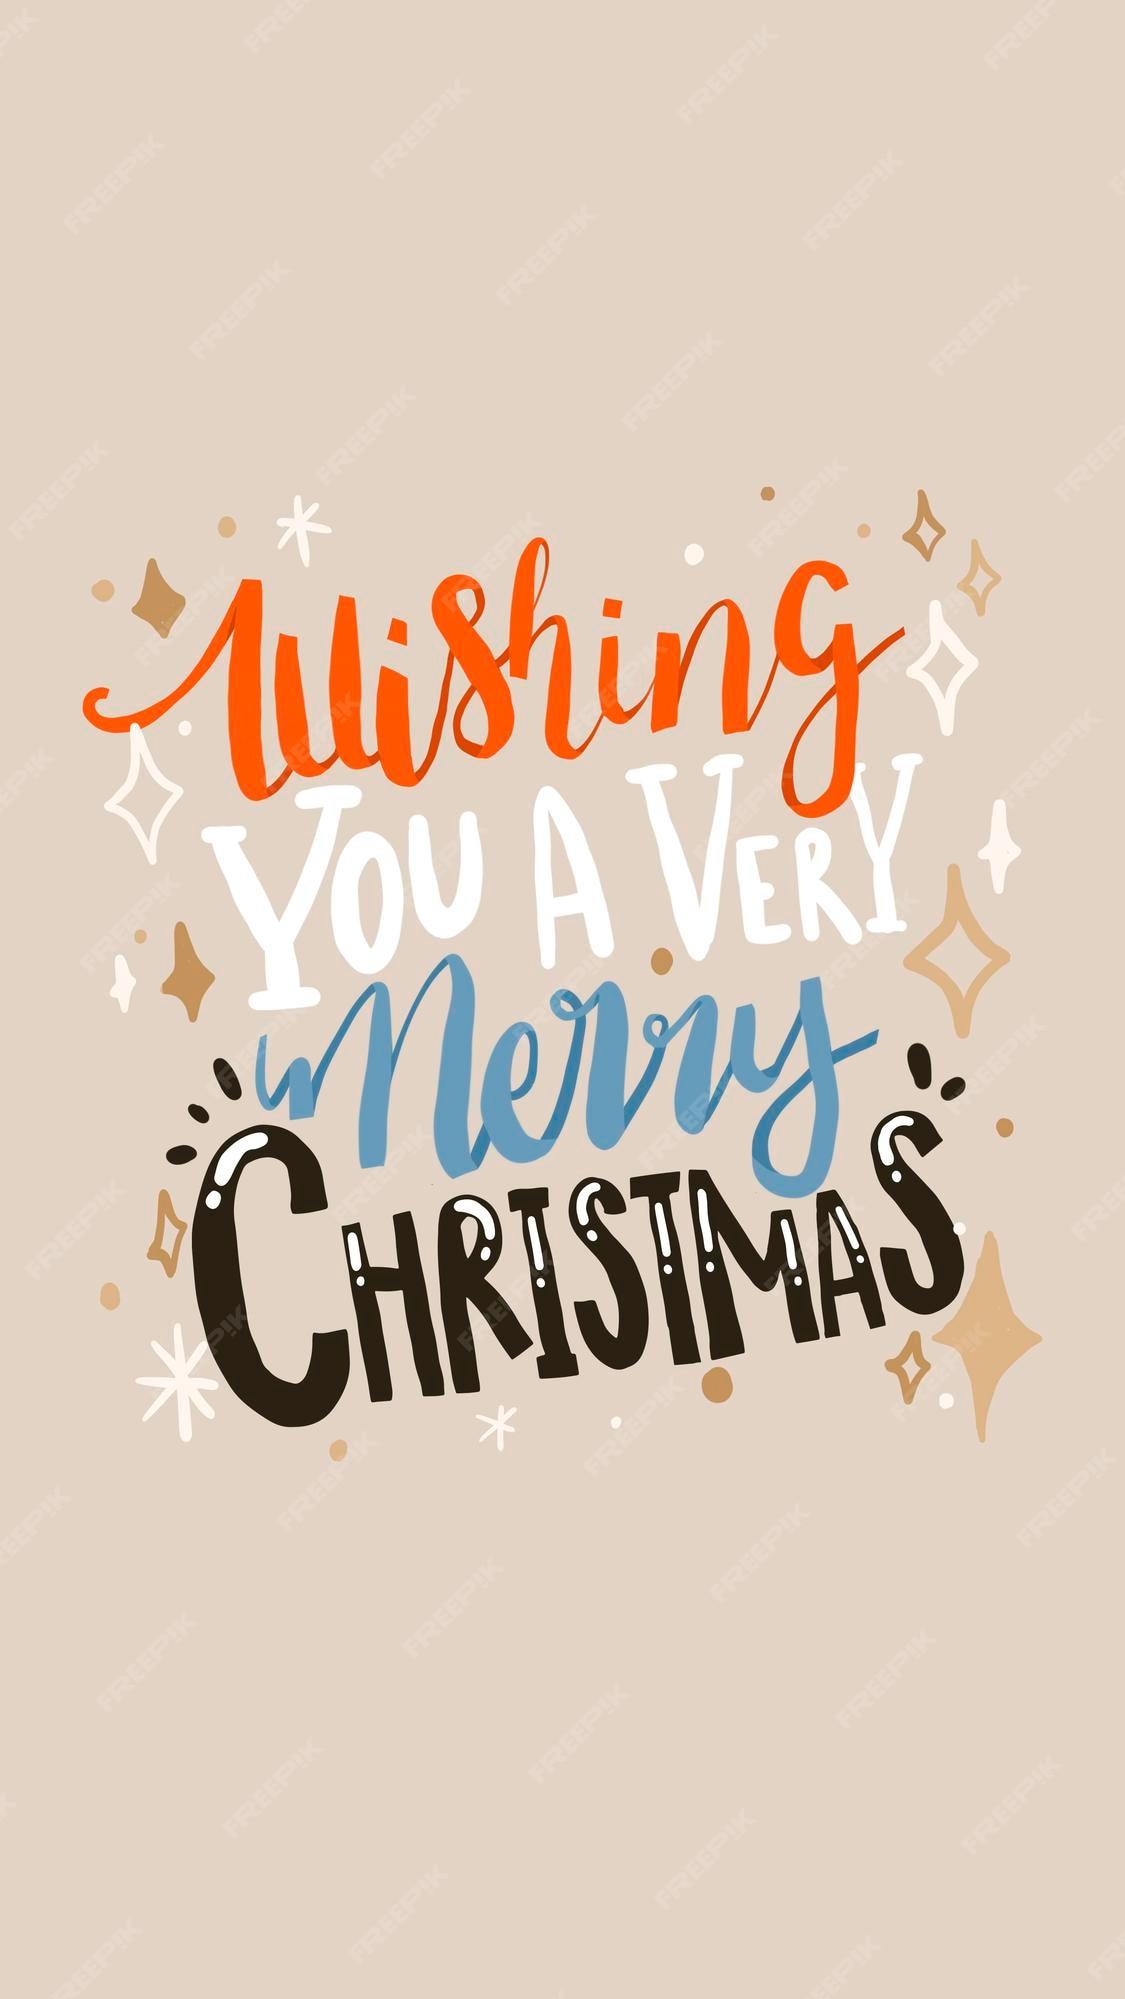 Free Vector Merry christmas iphone wallpaper holiday greeting